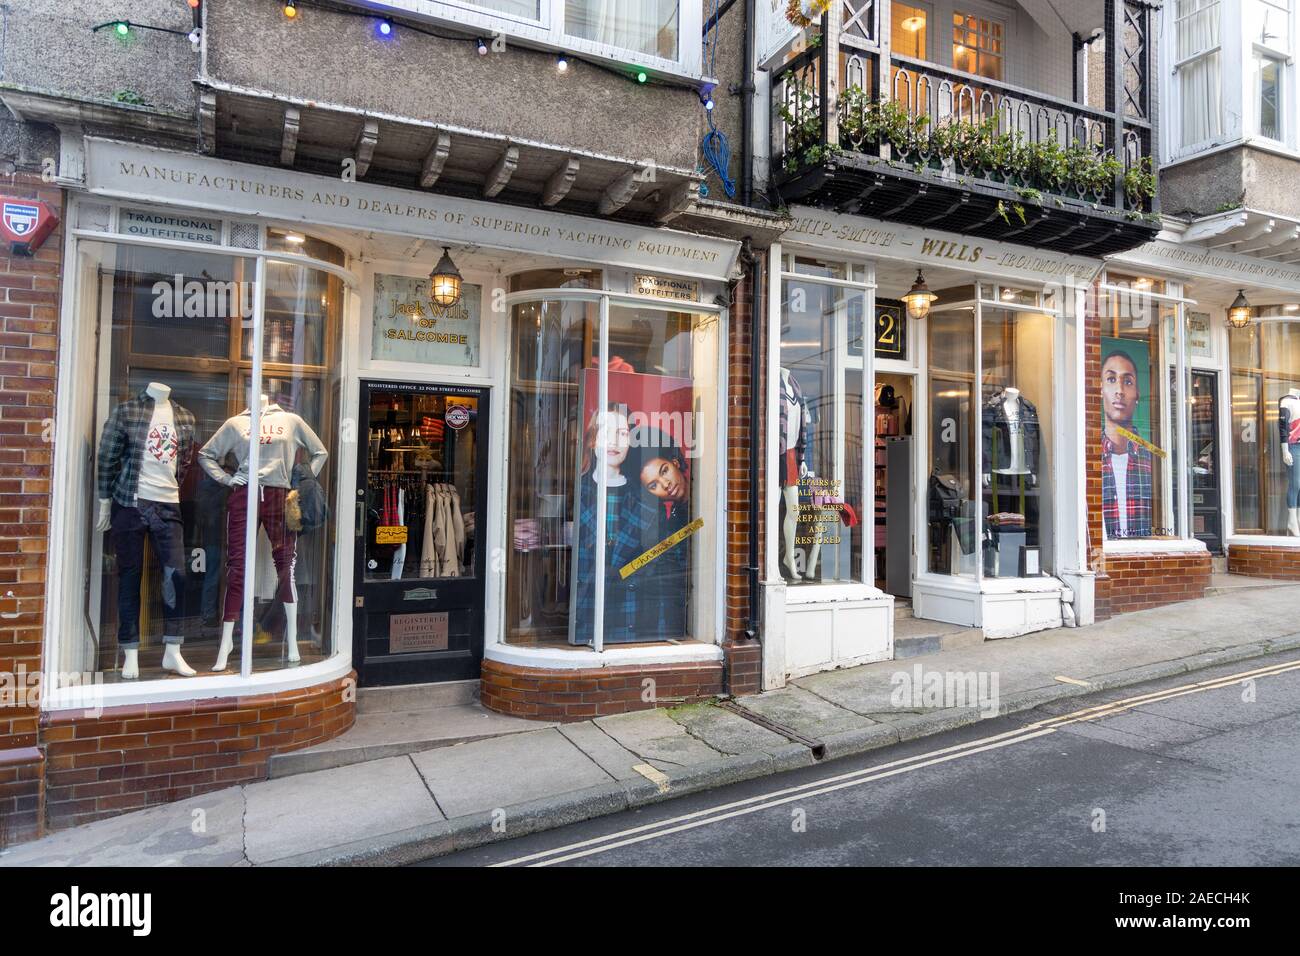 Jack Wills Salcombe High Resolution Stock Photography and Images - Alamy